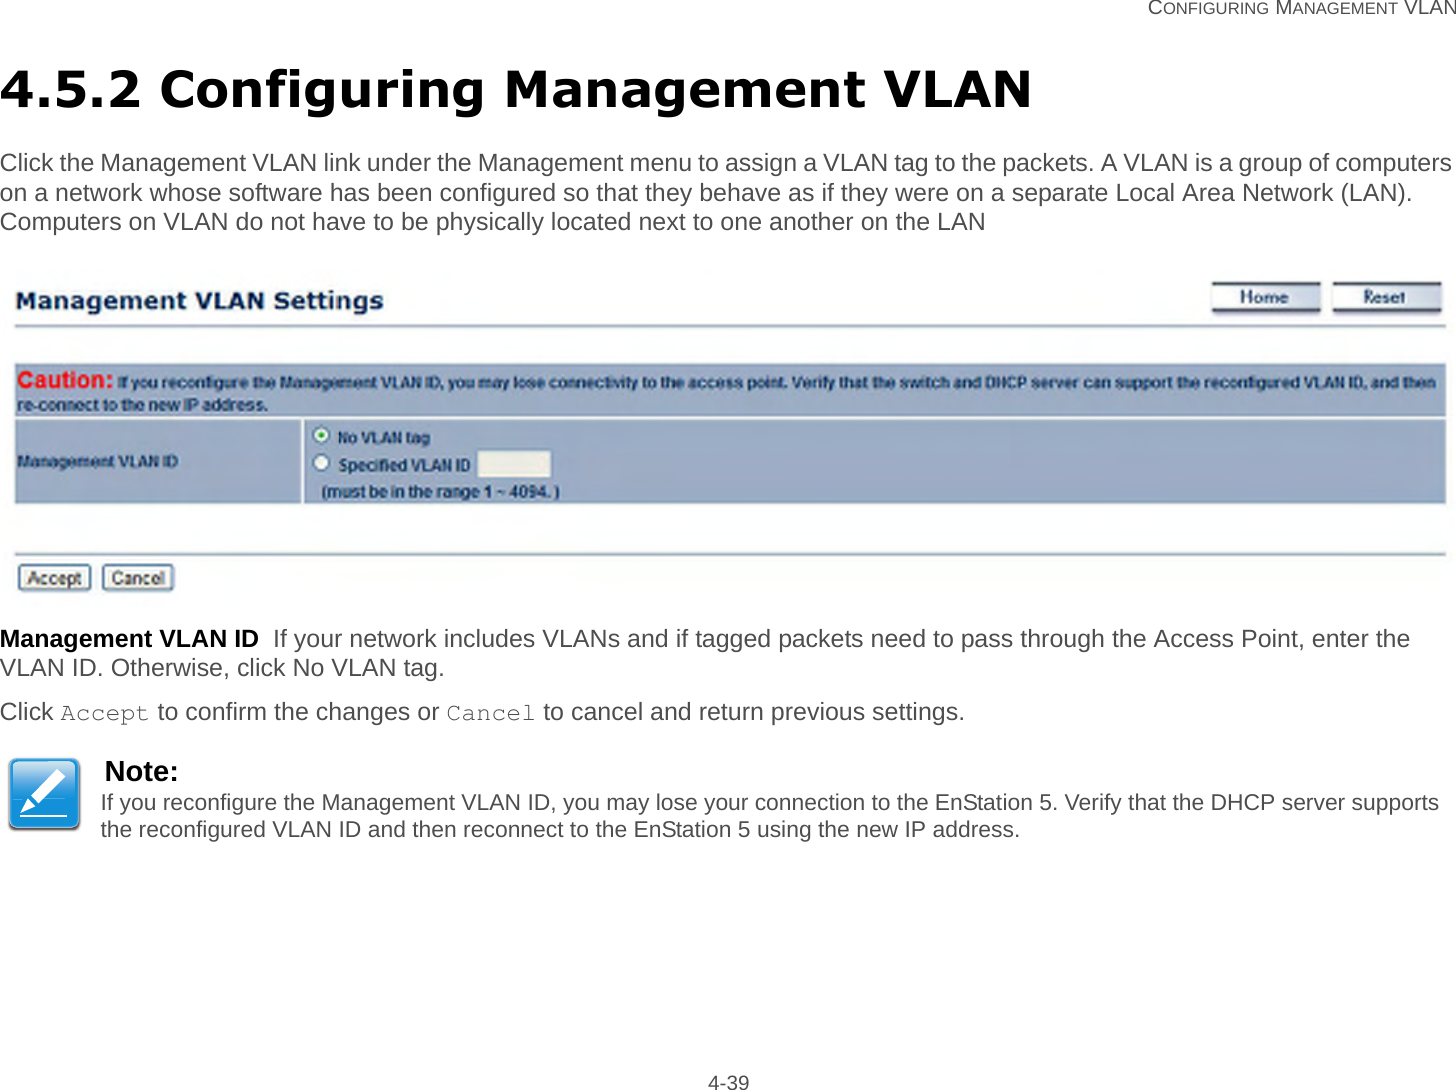   CONFIGURING MANAGEMENT VLAN 4-394.5.2 Configuring Management VLANClick the Management VLAN link under the Management menu to assign a VLAN tag to the packets. A VLAN is a group of computers on a network whose software has been configured so that they behave as if they were on a separate Local Area Network (LAN). Computers on VLAN do not have to be physically located next to one another on the LANManagement VLAN ID  If your network includes VLANs and if tagged packets need to pass through the Access Point, enter the VLAN ID. Otherwise, click No VLAN tag.Click Accept to confirm the changes or Cancel to cancel and return previous settings.Note:If you reconfigure the Management VLAN ID, you may lose your connection to the EnStation 5. Verify that the DHCP server supports the reconfigured VLAN ID and then reconnect to the EnStation 5 using the new IP address.